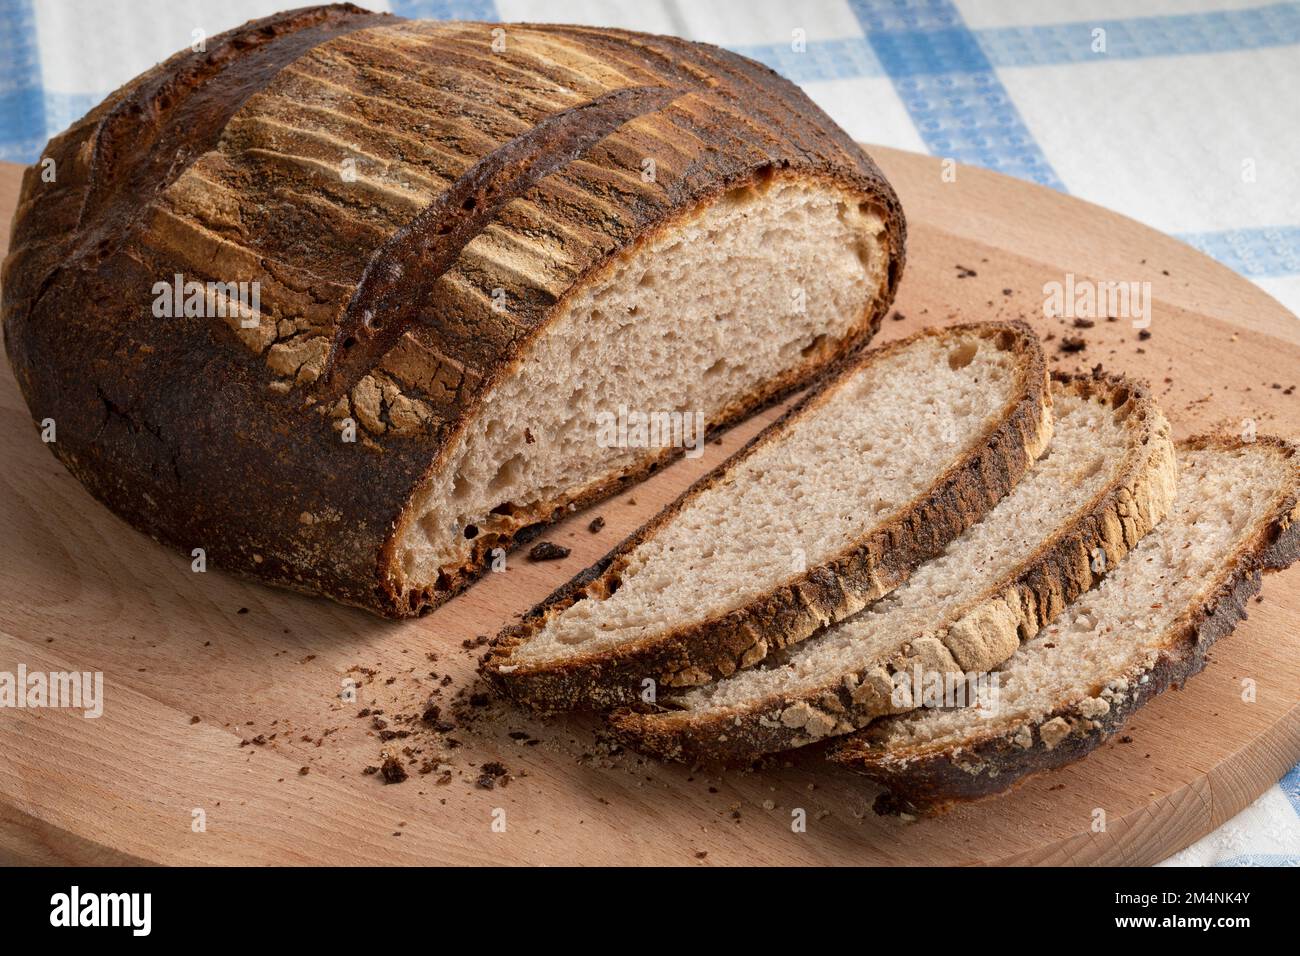 https://c8.alamy.com/comp/2M4NK4Y/traditional-whole-german-eifler-brot-german-bread-and-slices-close-up-on-a-cutting-board-2M4NK4Y.jpg